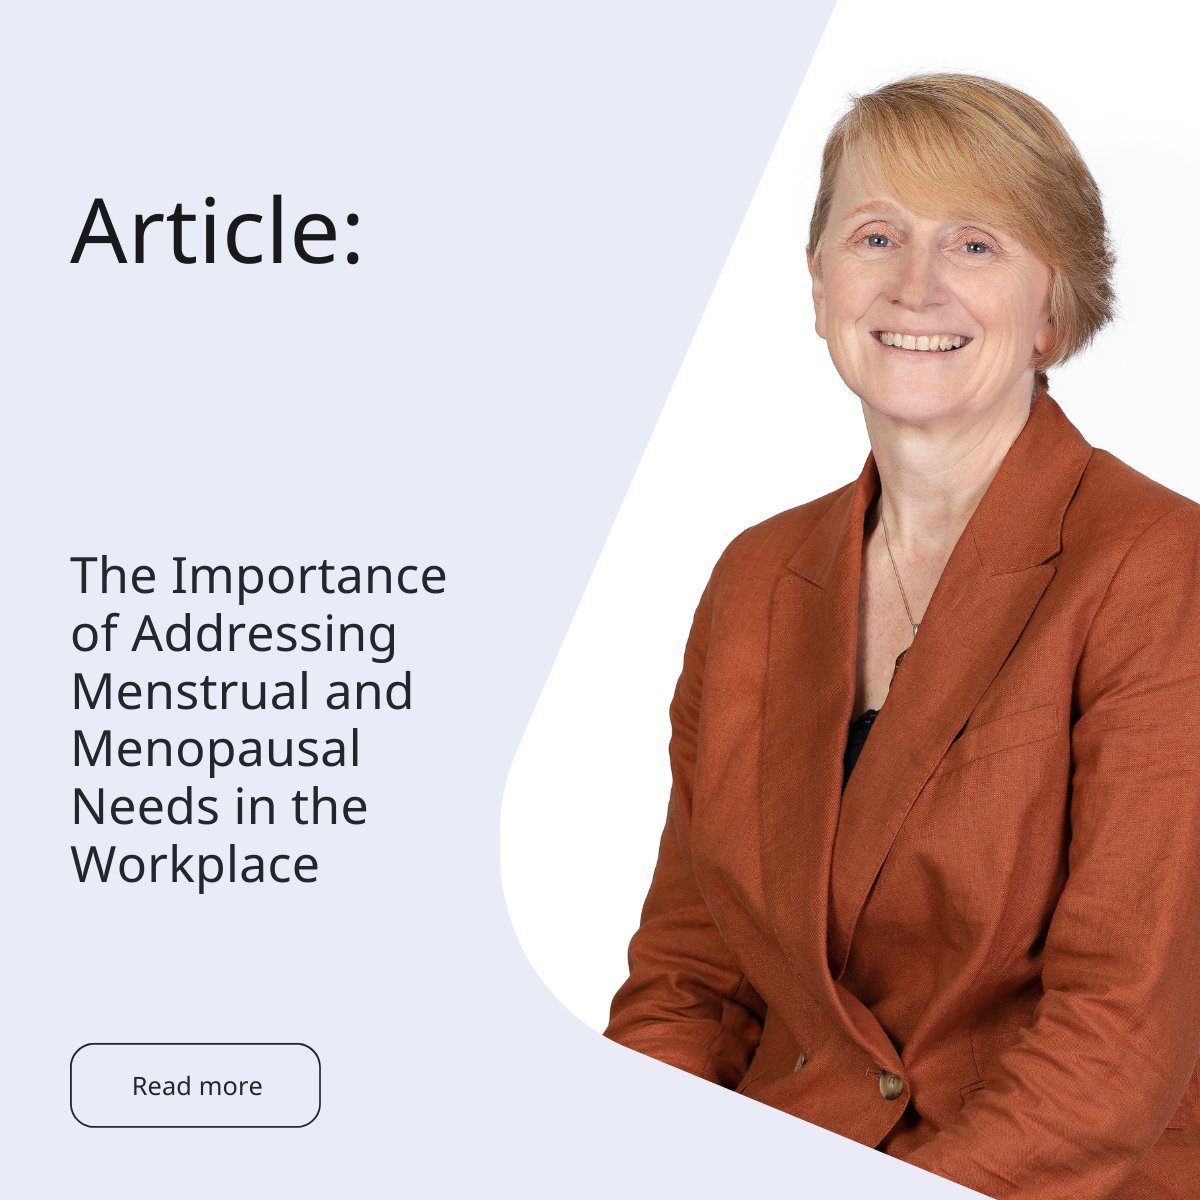 Up to 10% of women experiencing #menopause leave the workforce early, rising to 25% for those with severe symptoms (@fawcettsociety). Taking proactive steps can make a significant difference in retaining talent and ensuring inclusivity. Read more: bit.ly/3JEkfPS